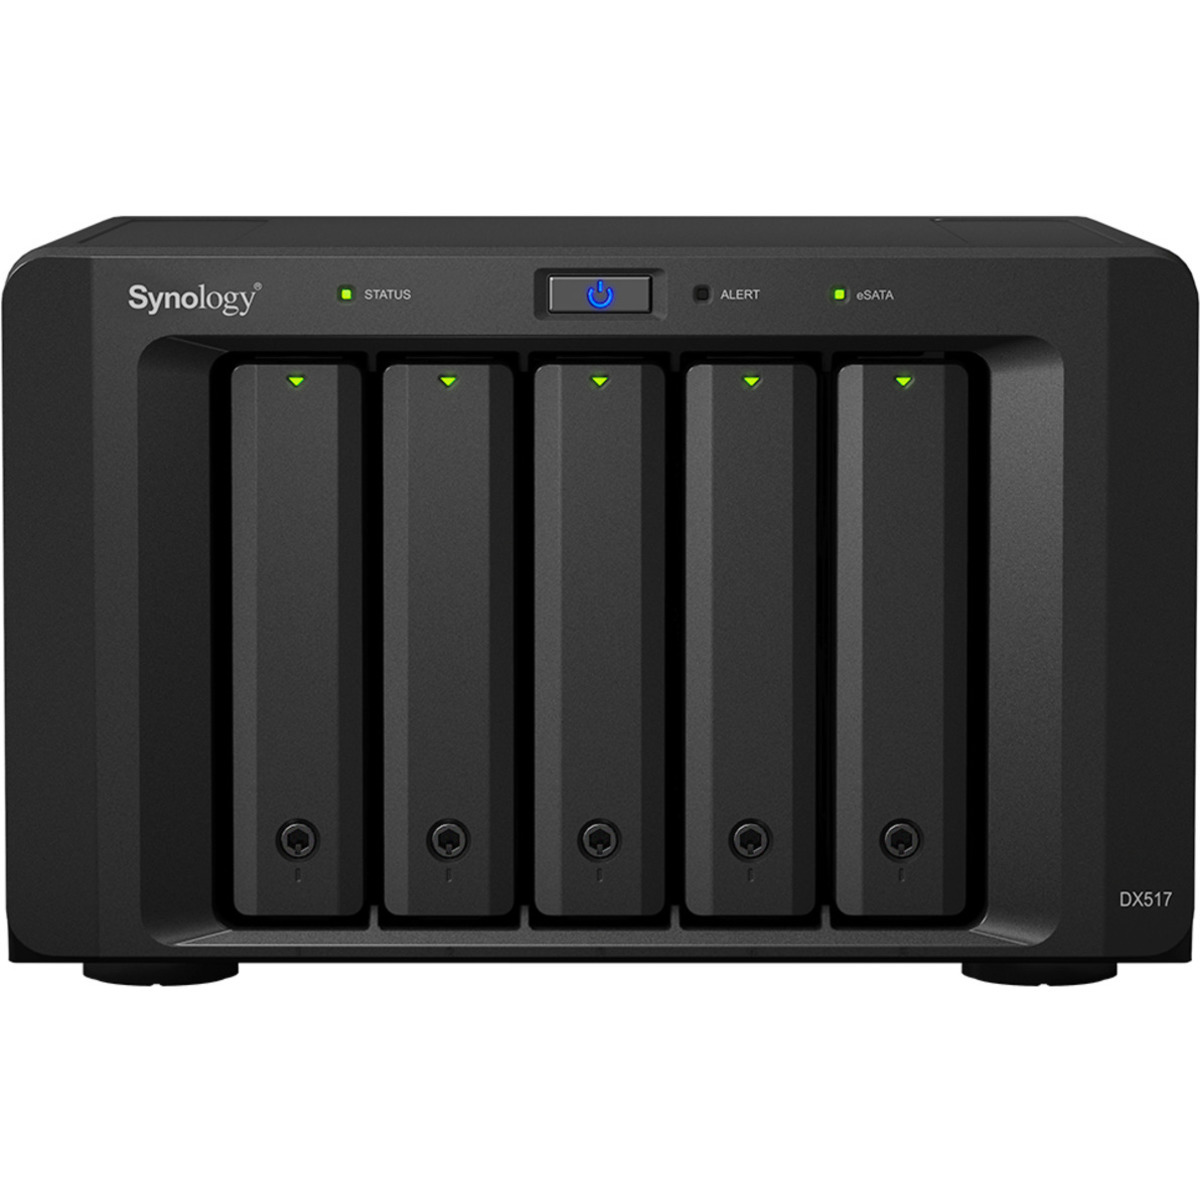 buy $2849 Synology DX517 90tb Desktop Expansion Enclosure 5x18000gb Toshiba Enterprise Capacity MG09ACA18TE 3.5 7200rpm SATA 6Gb/s HDD ENTERPRISE Class Drives Installed - Burn-In Tested - nas headquarters buy network attached storage server device das new raid-5 free shipping usa christmas new year holiday sale DX517